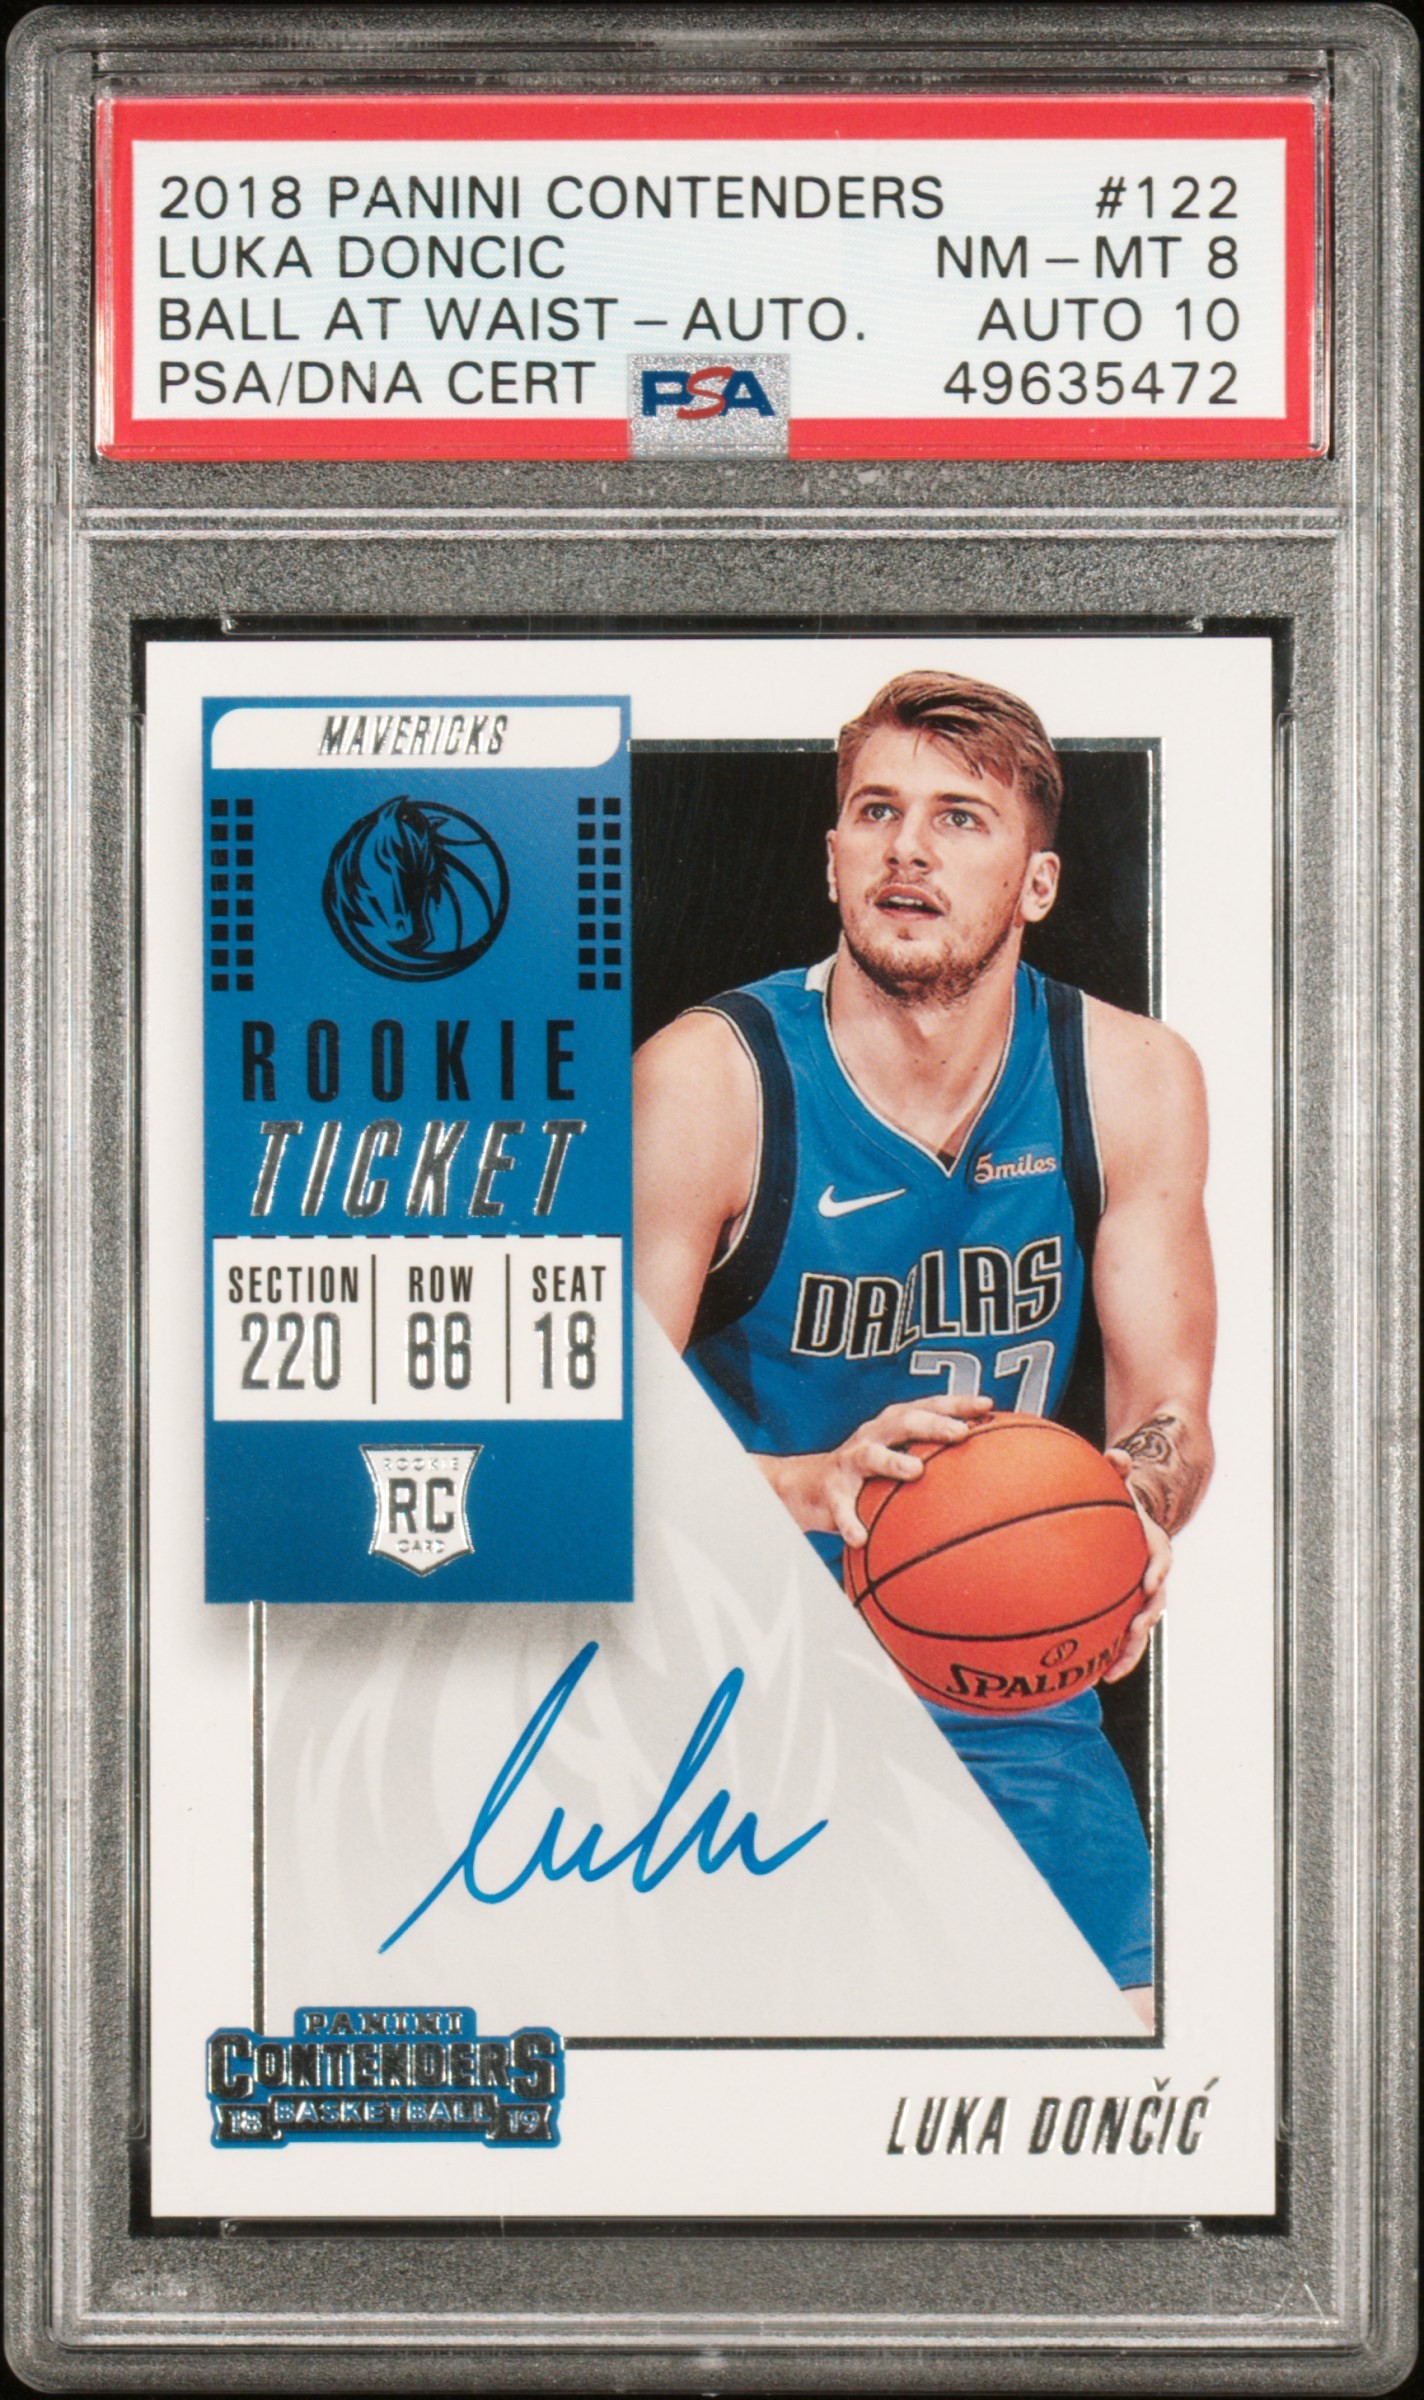 2018-19 Panini Contenders Rookie Ticket Autograph #122 Luka Doncic, Ball at Waist Signed Rookie Card - PSA NM-MT 8, PSA/DNA GEM MT 10